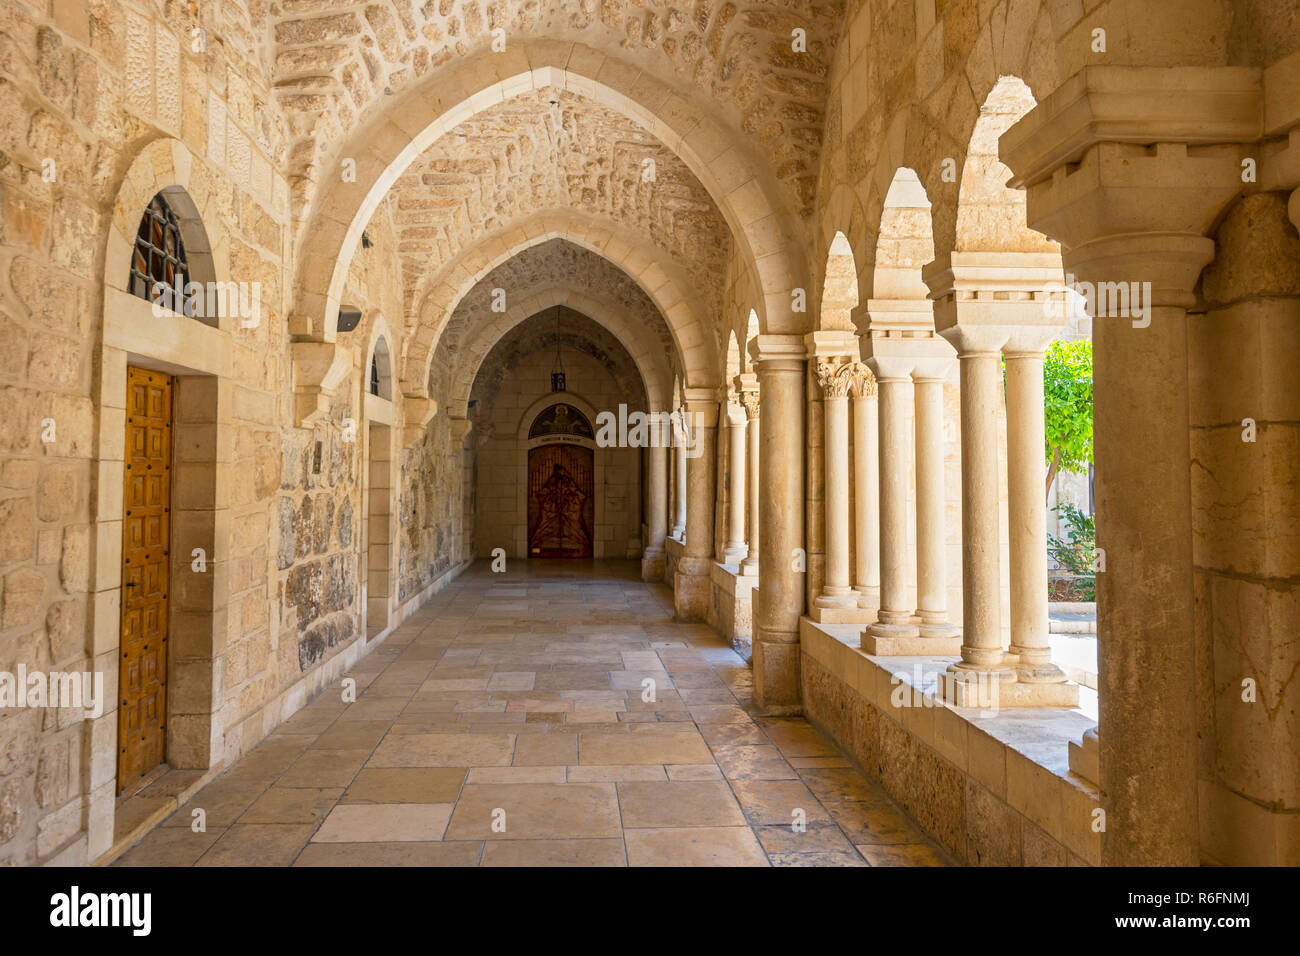 The Inner Courtyard Of The Church Of The Nativity Is Surrounded By Beautiful Covered Terraces With Stone Columns, Bethlehem, Palestine Stock Photo